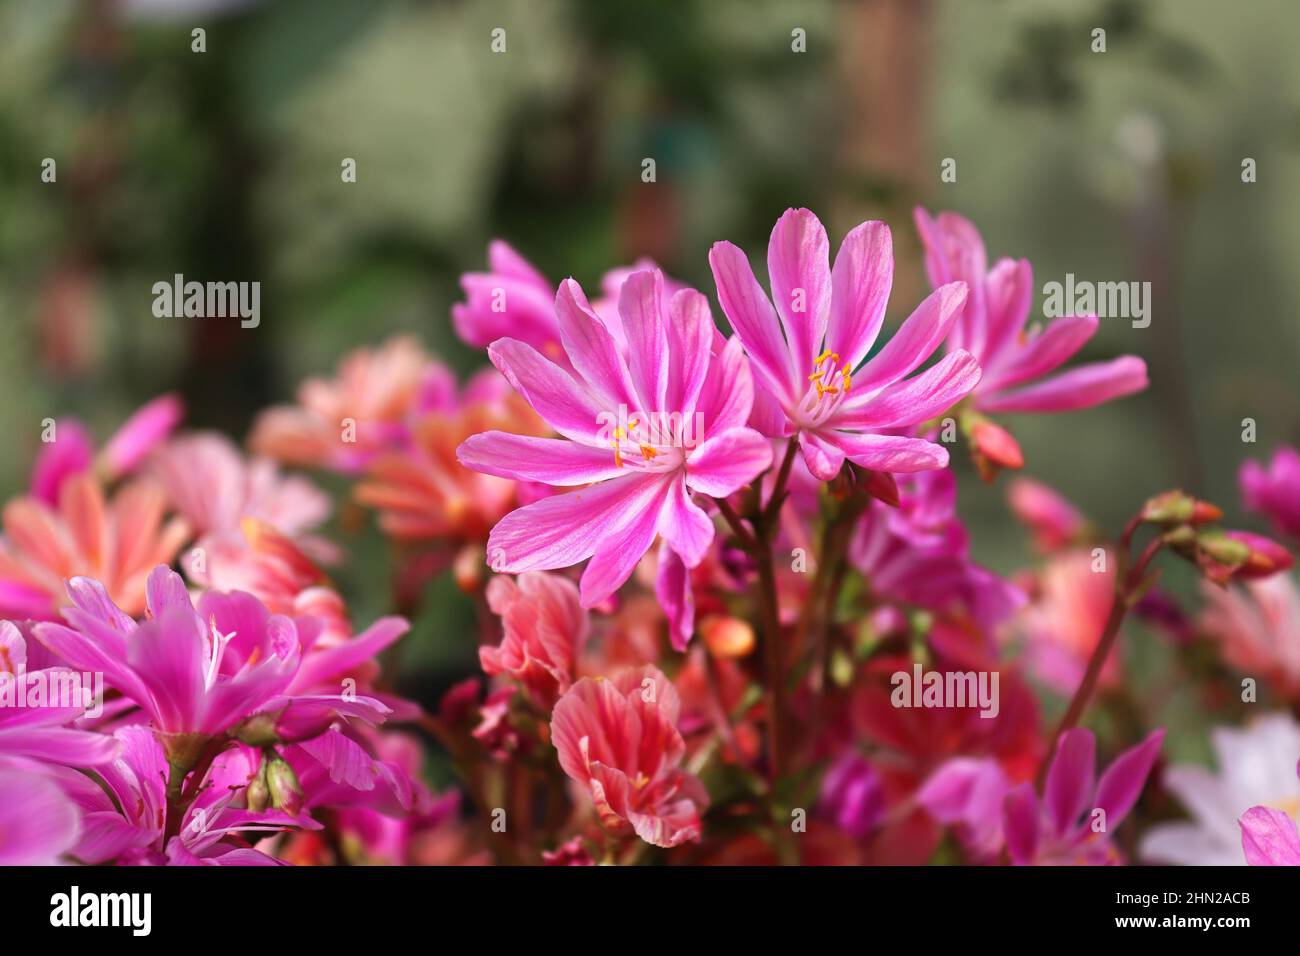 Closeup view of the delicate petals on a lewisia plant Stock Photo